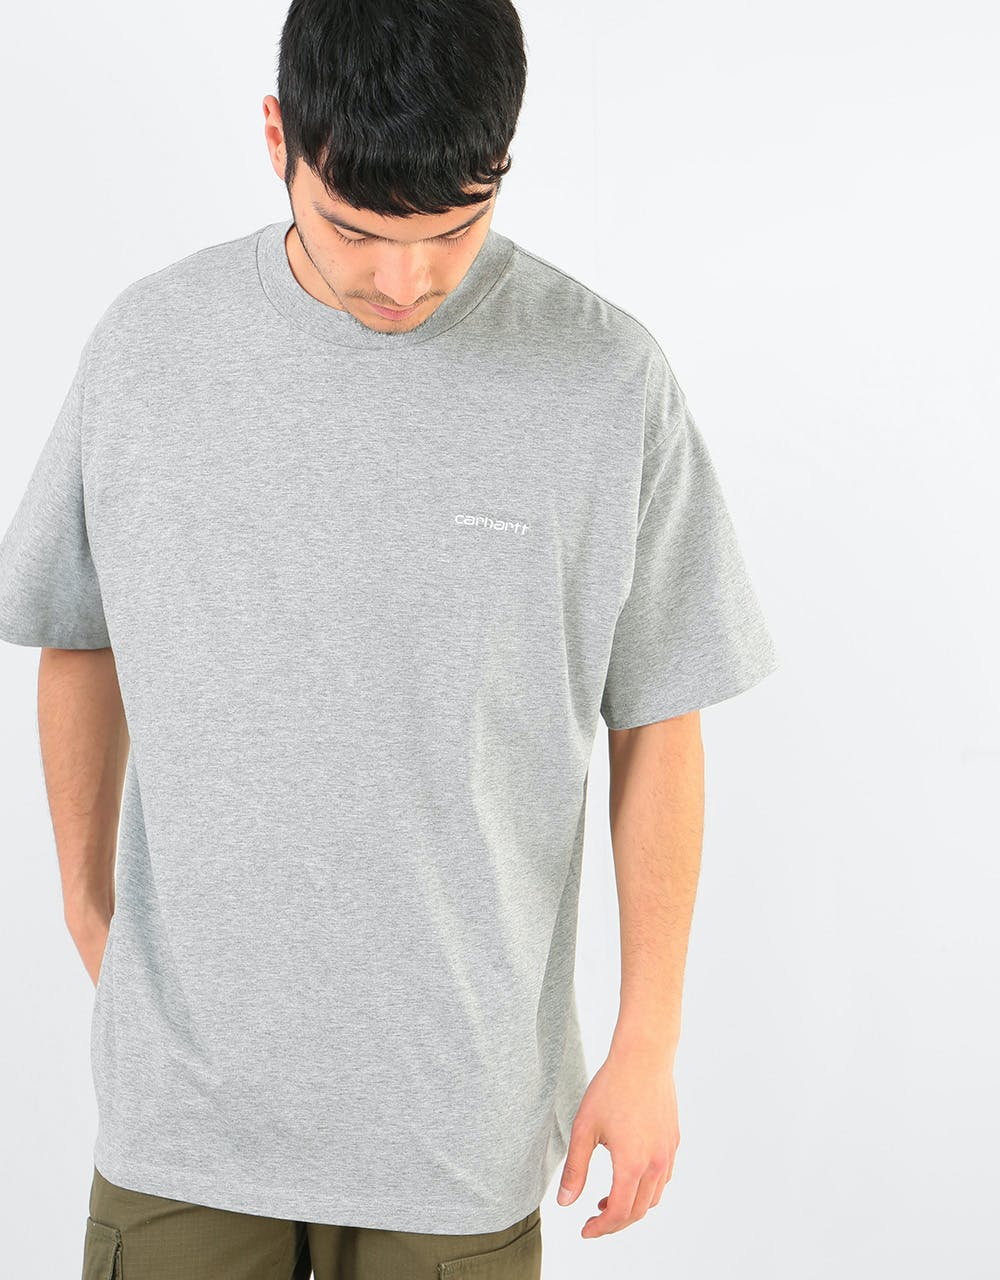 Carhartt WIP S/S Script Embroidery T-Shirt - Grey Heather/White